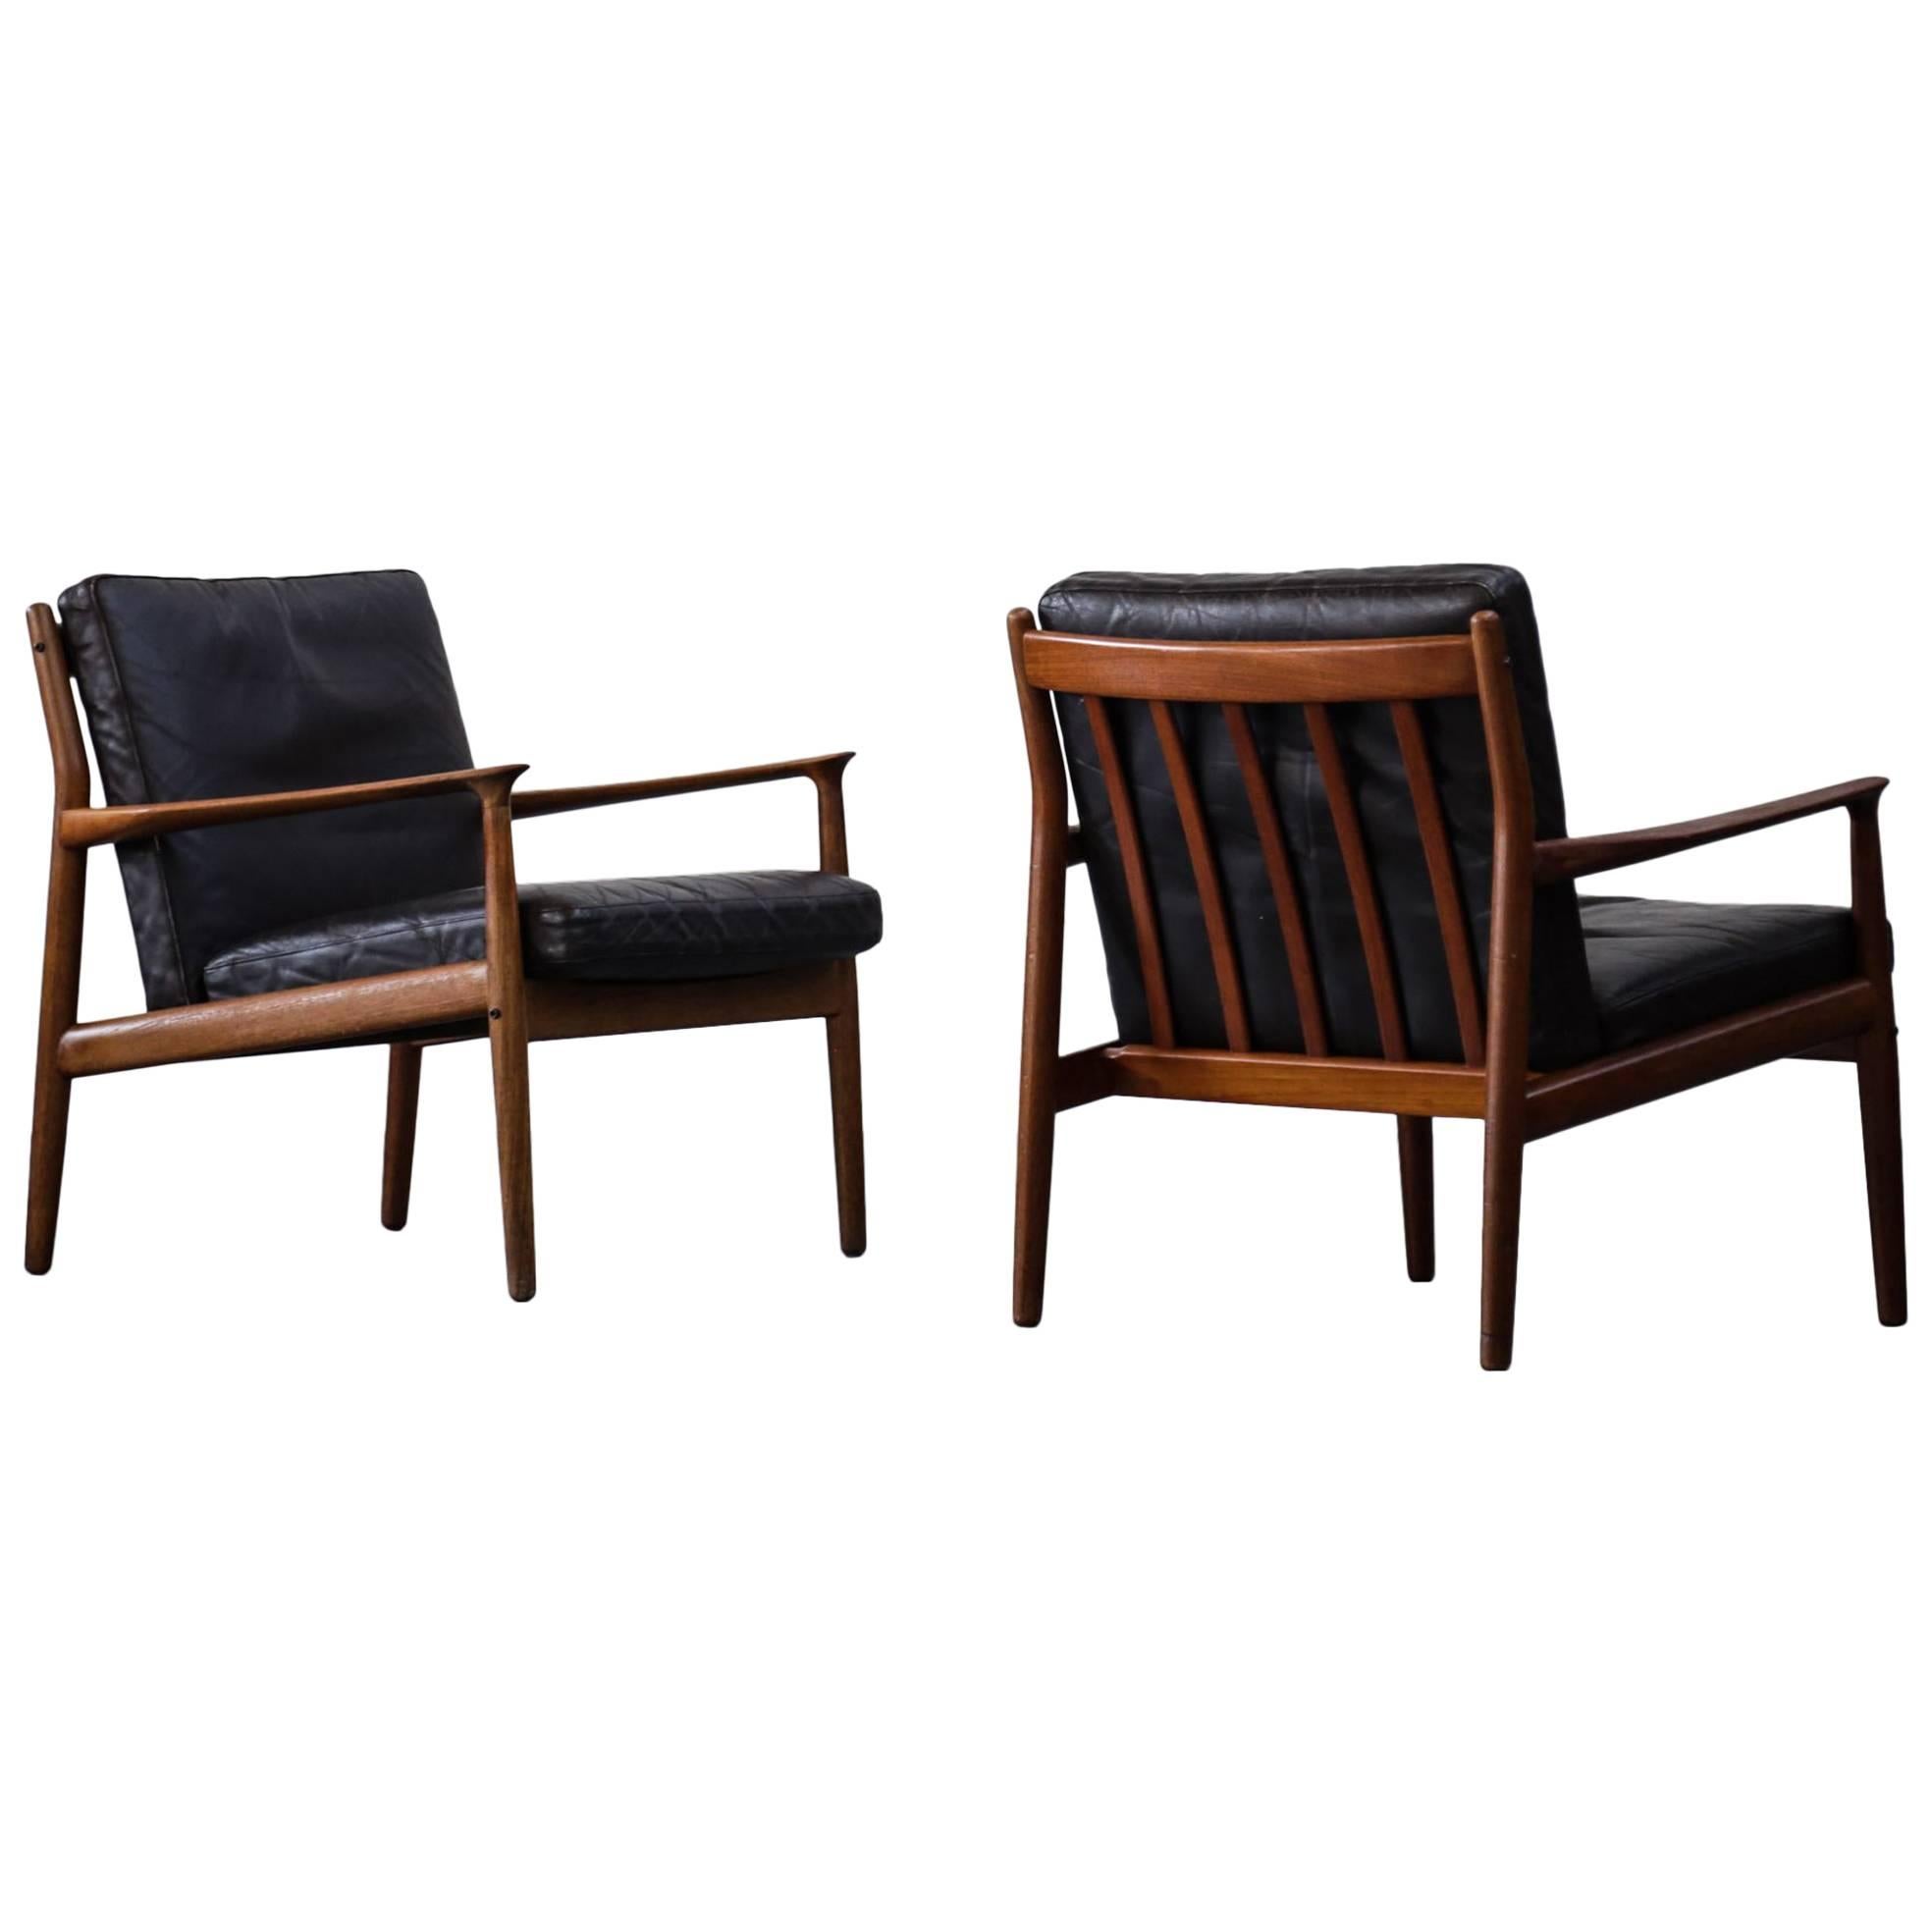 Pair of Grete Jalk Leather Armchairs for Glostrup